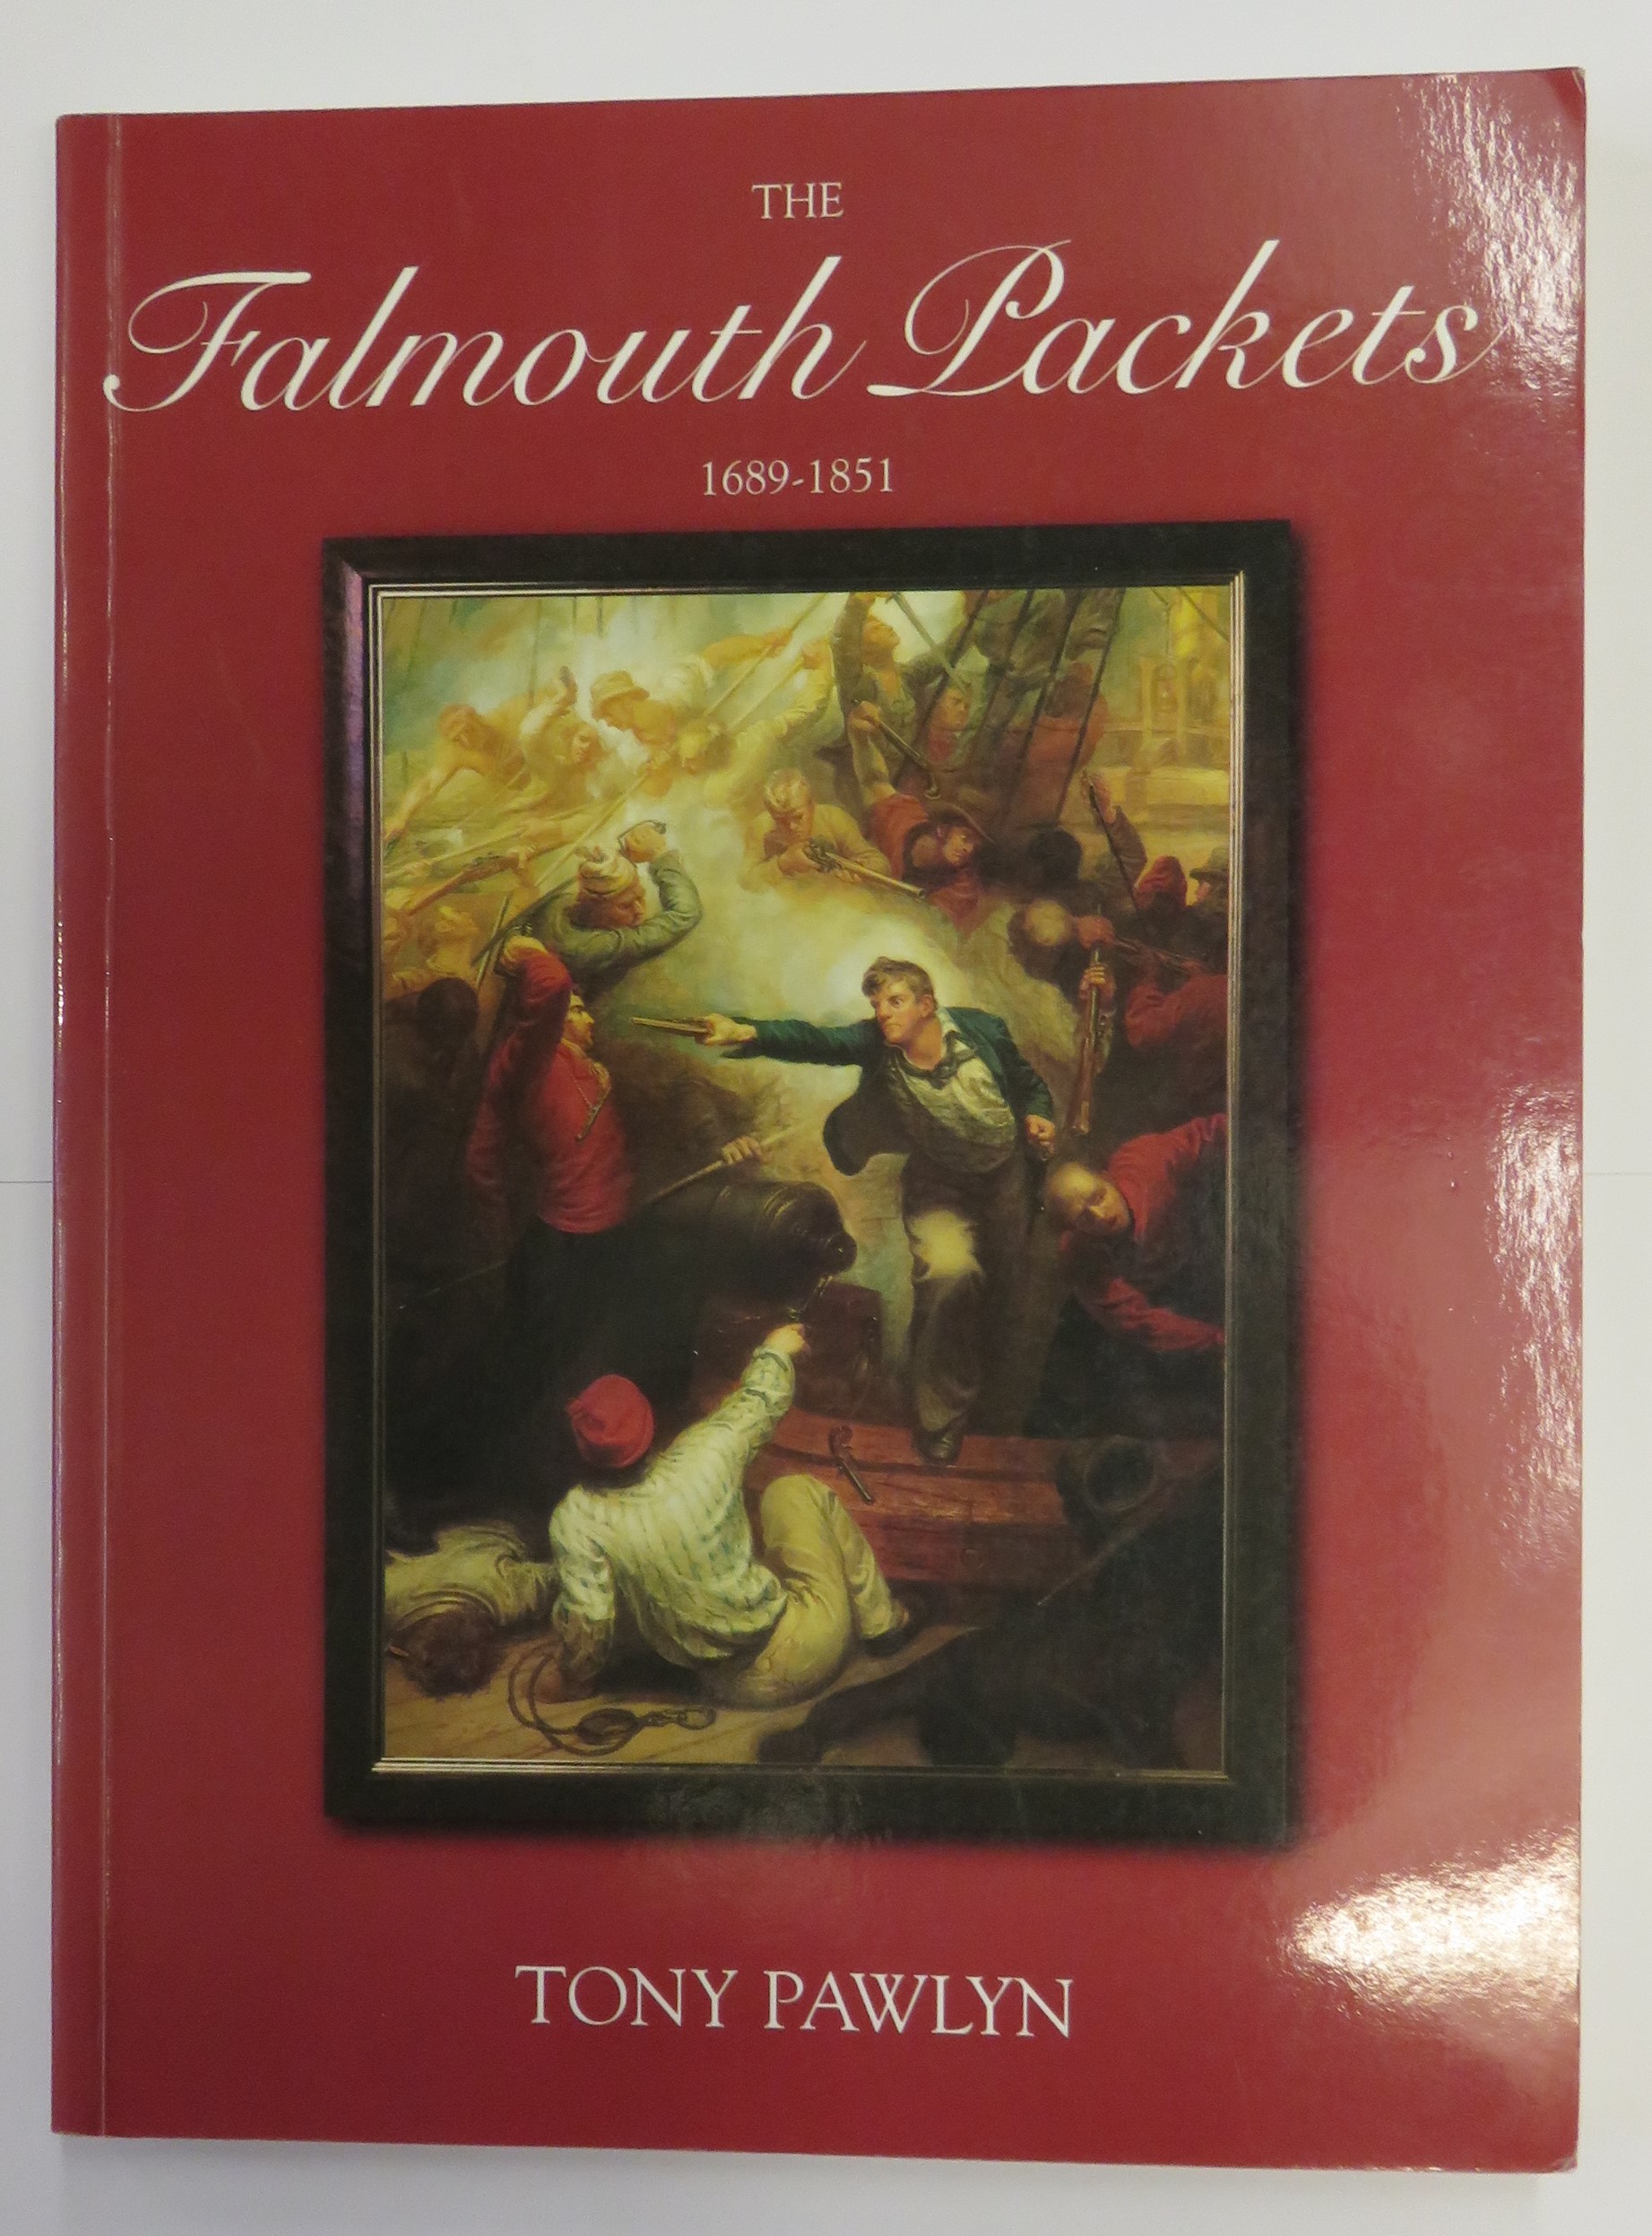 The Falmouth Packets 1689-1851